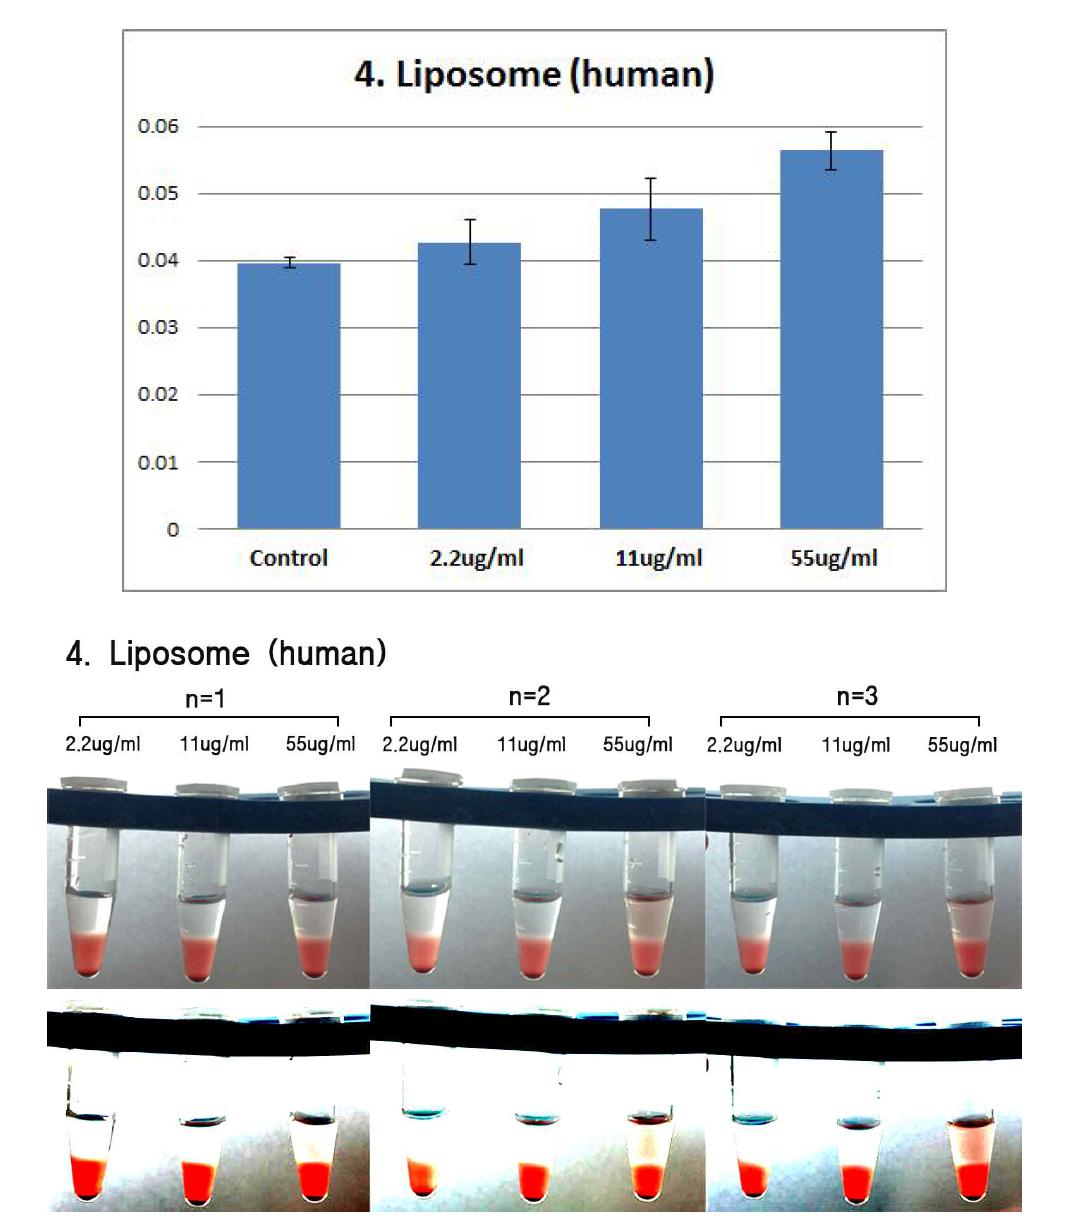 Effects of Liposome on human erythrocyte. Erythrocyte were treated with Liposome (55 ug/ml, 11 ug/ml, 2.2 ug/ml) for 2hrs. The results are presented as mean ± SE